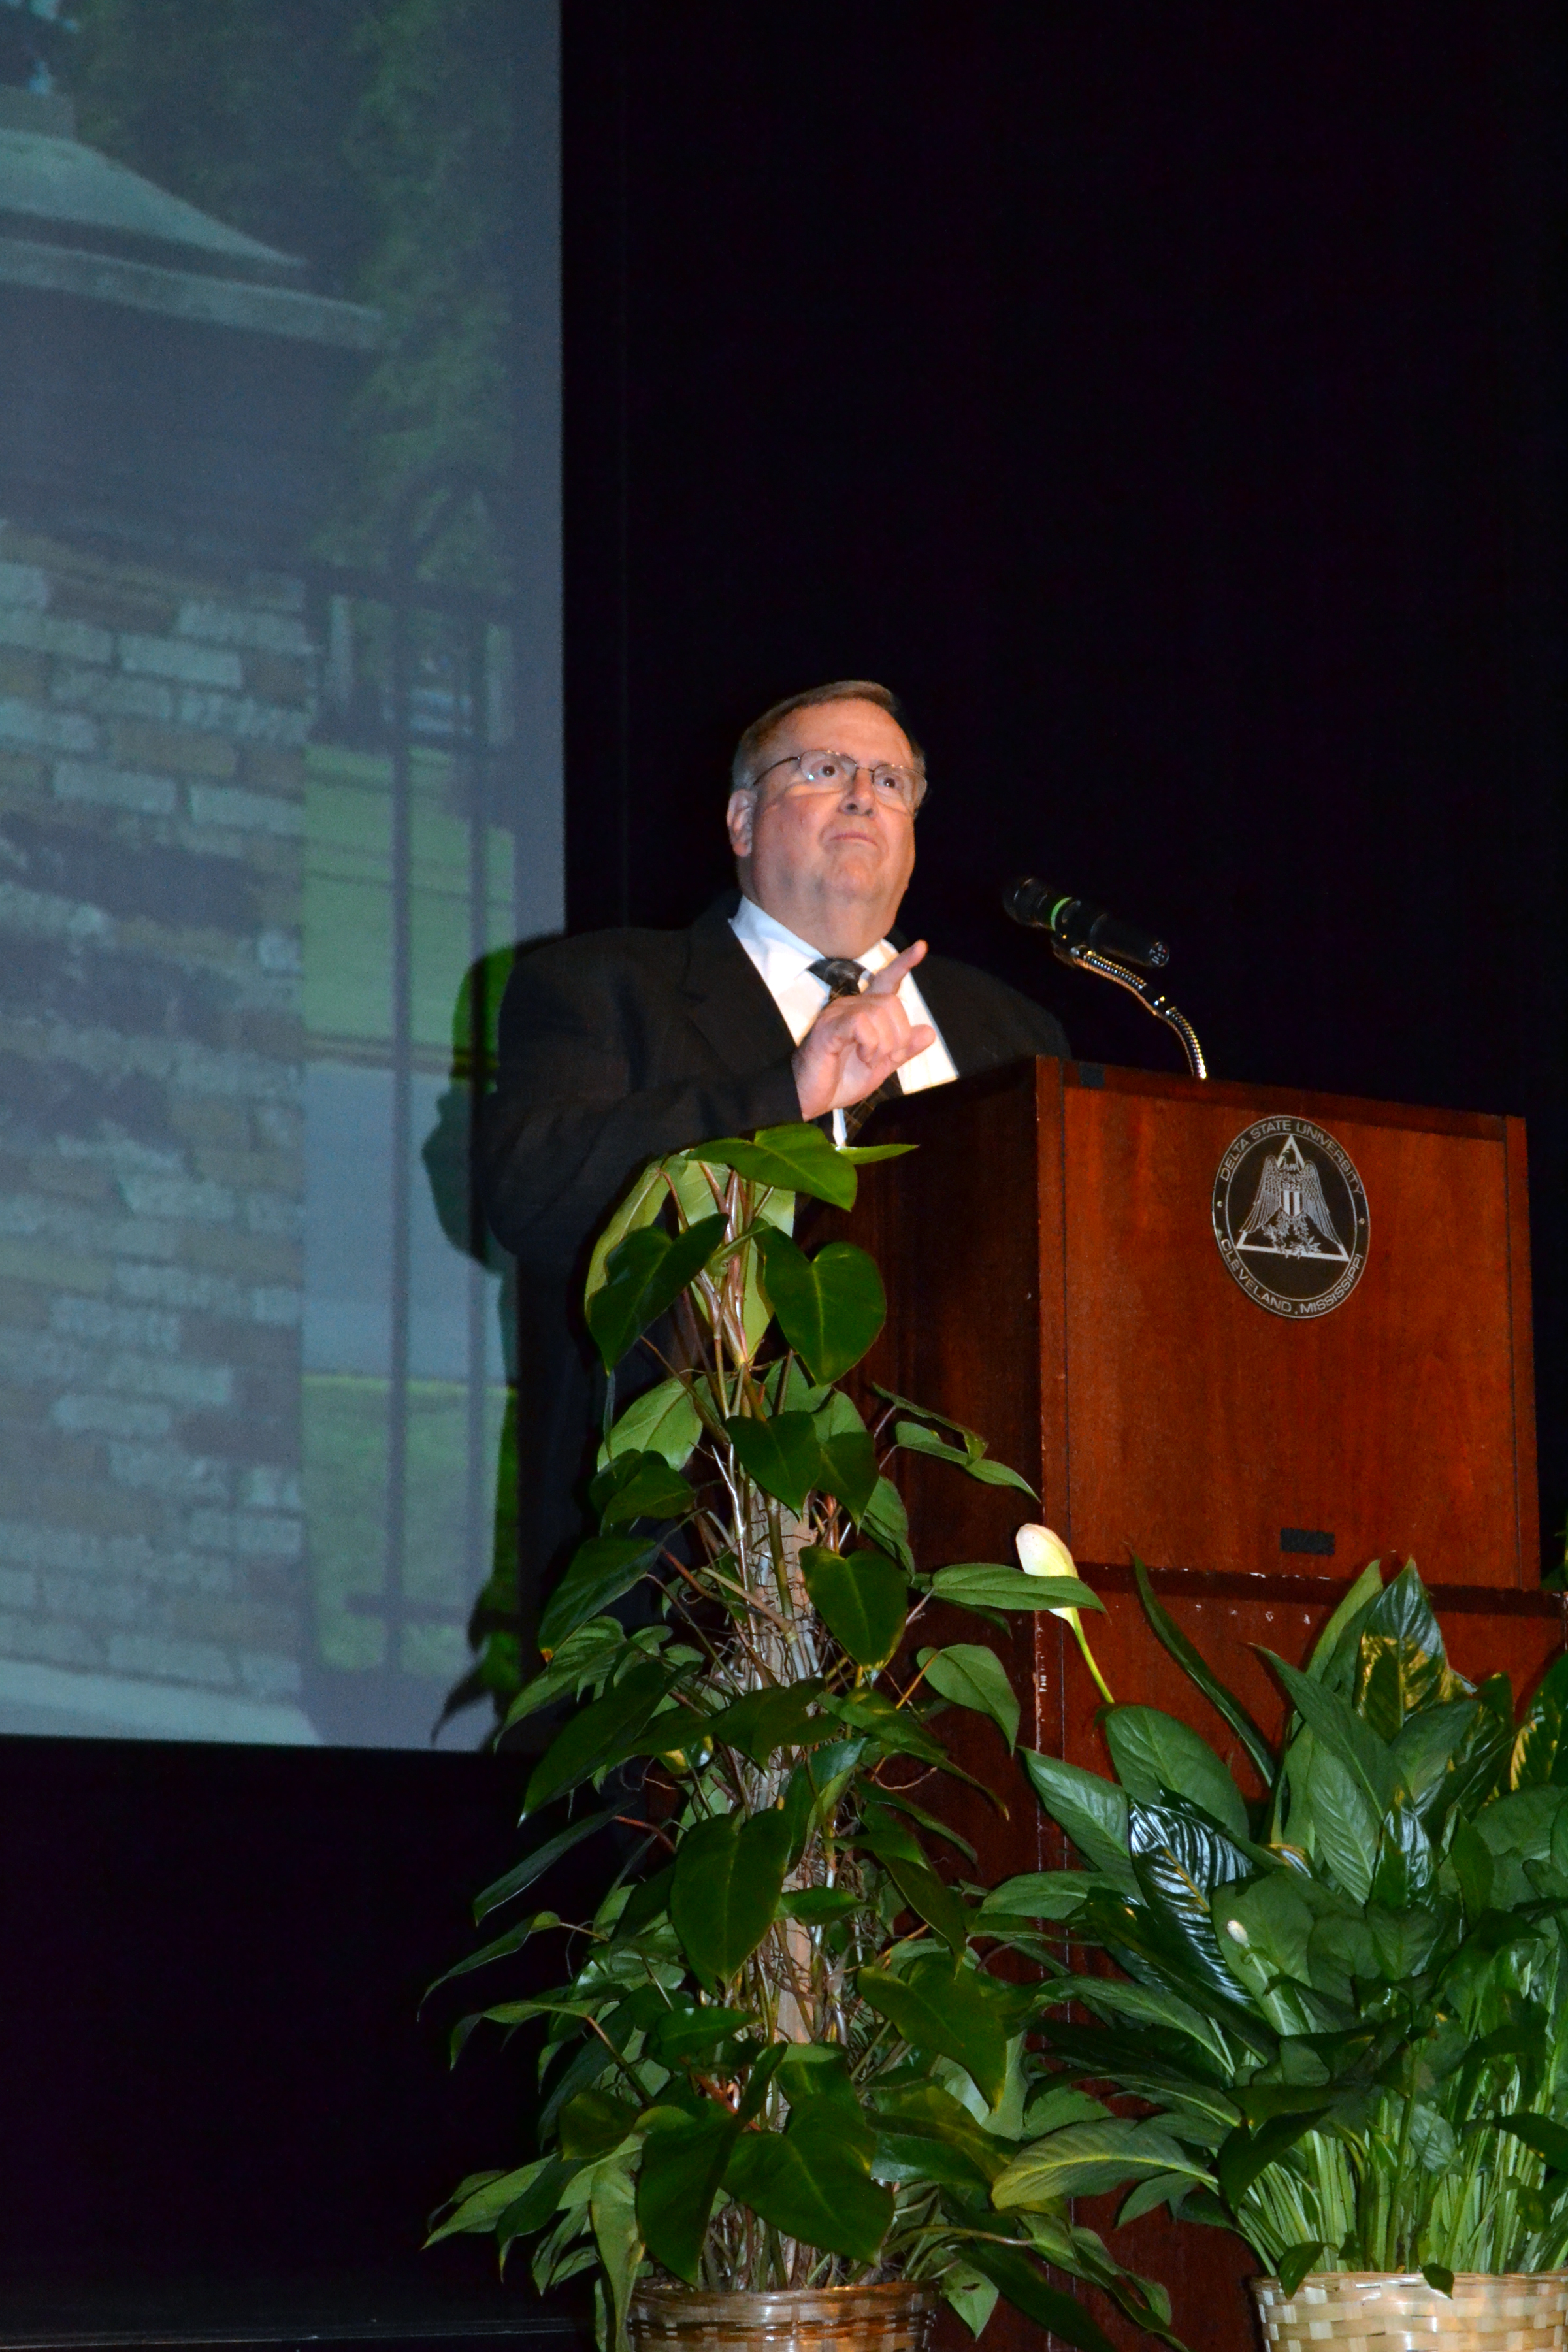 PHOTO:  Delta State President Dr. John M. Hilper delivers the State of the University address during opening convocation.